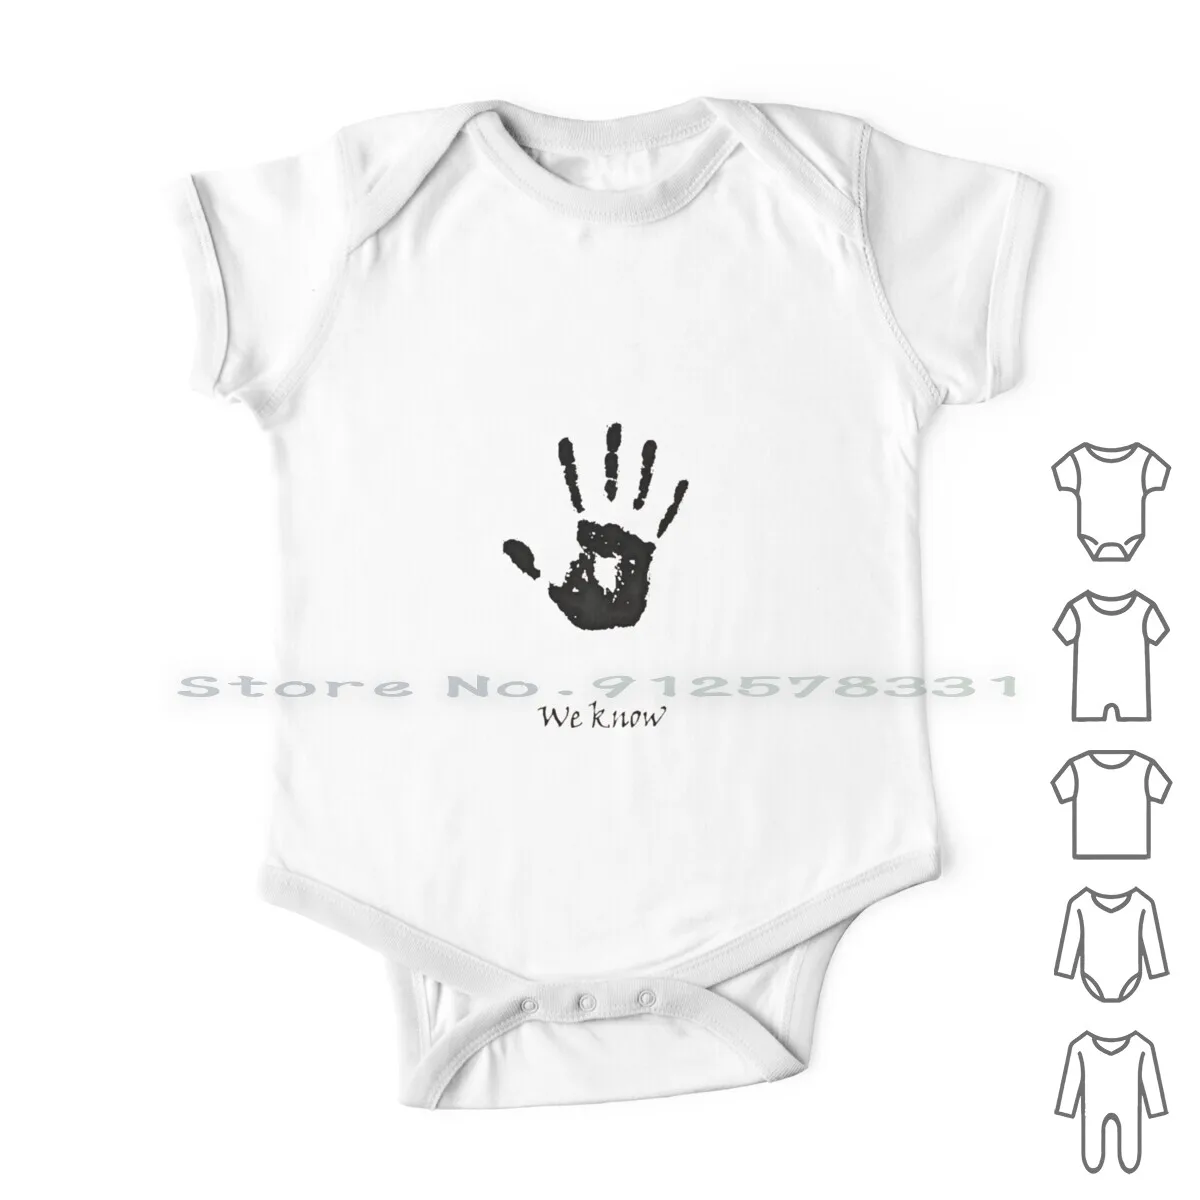 

Dark Brotherhood Knows.. You've Been Bad! Newborn Baby Clothes Rompers Cotton Jumpsuits We Know Dragon Born Bathesda Rpg